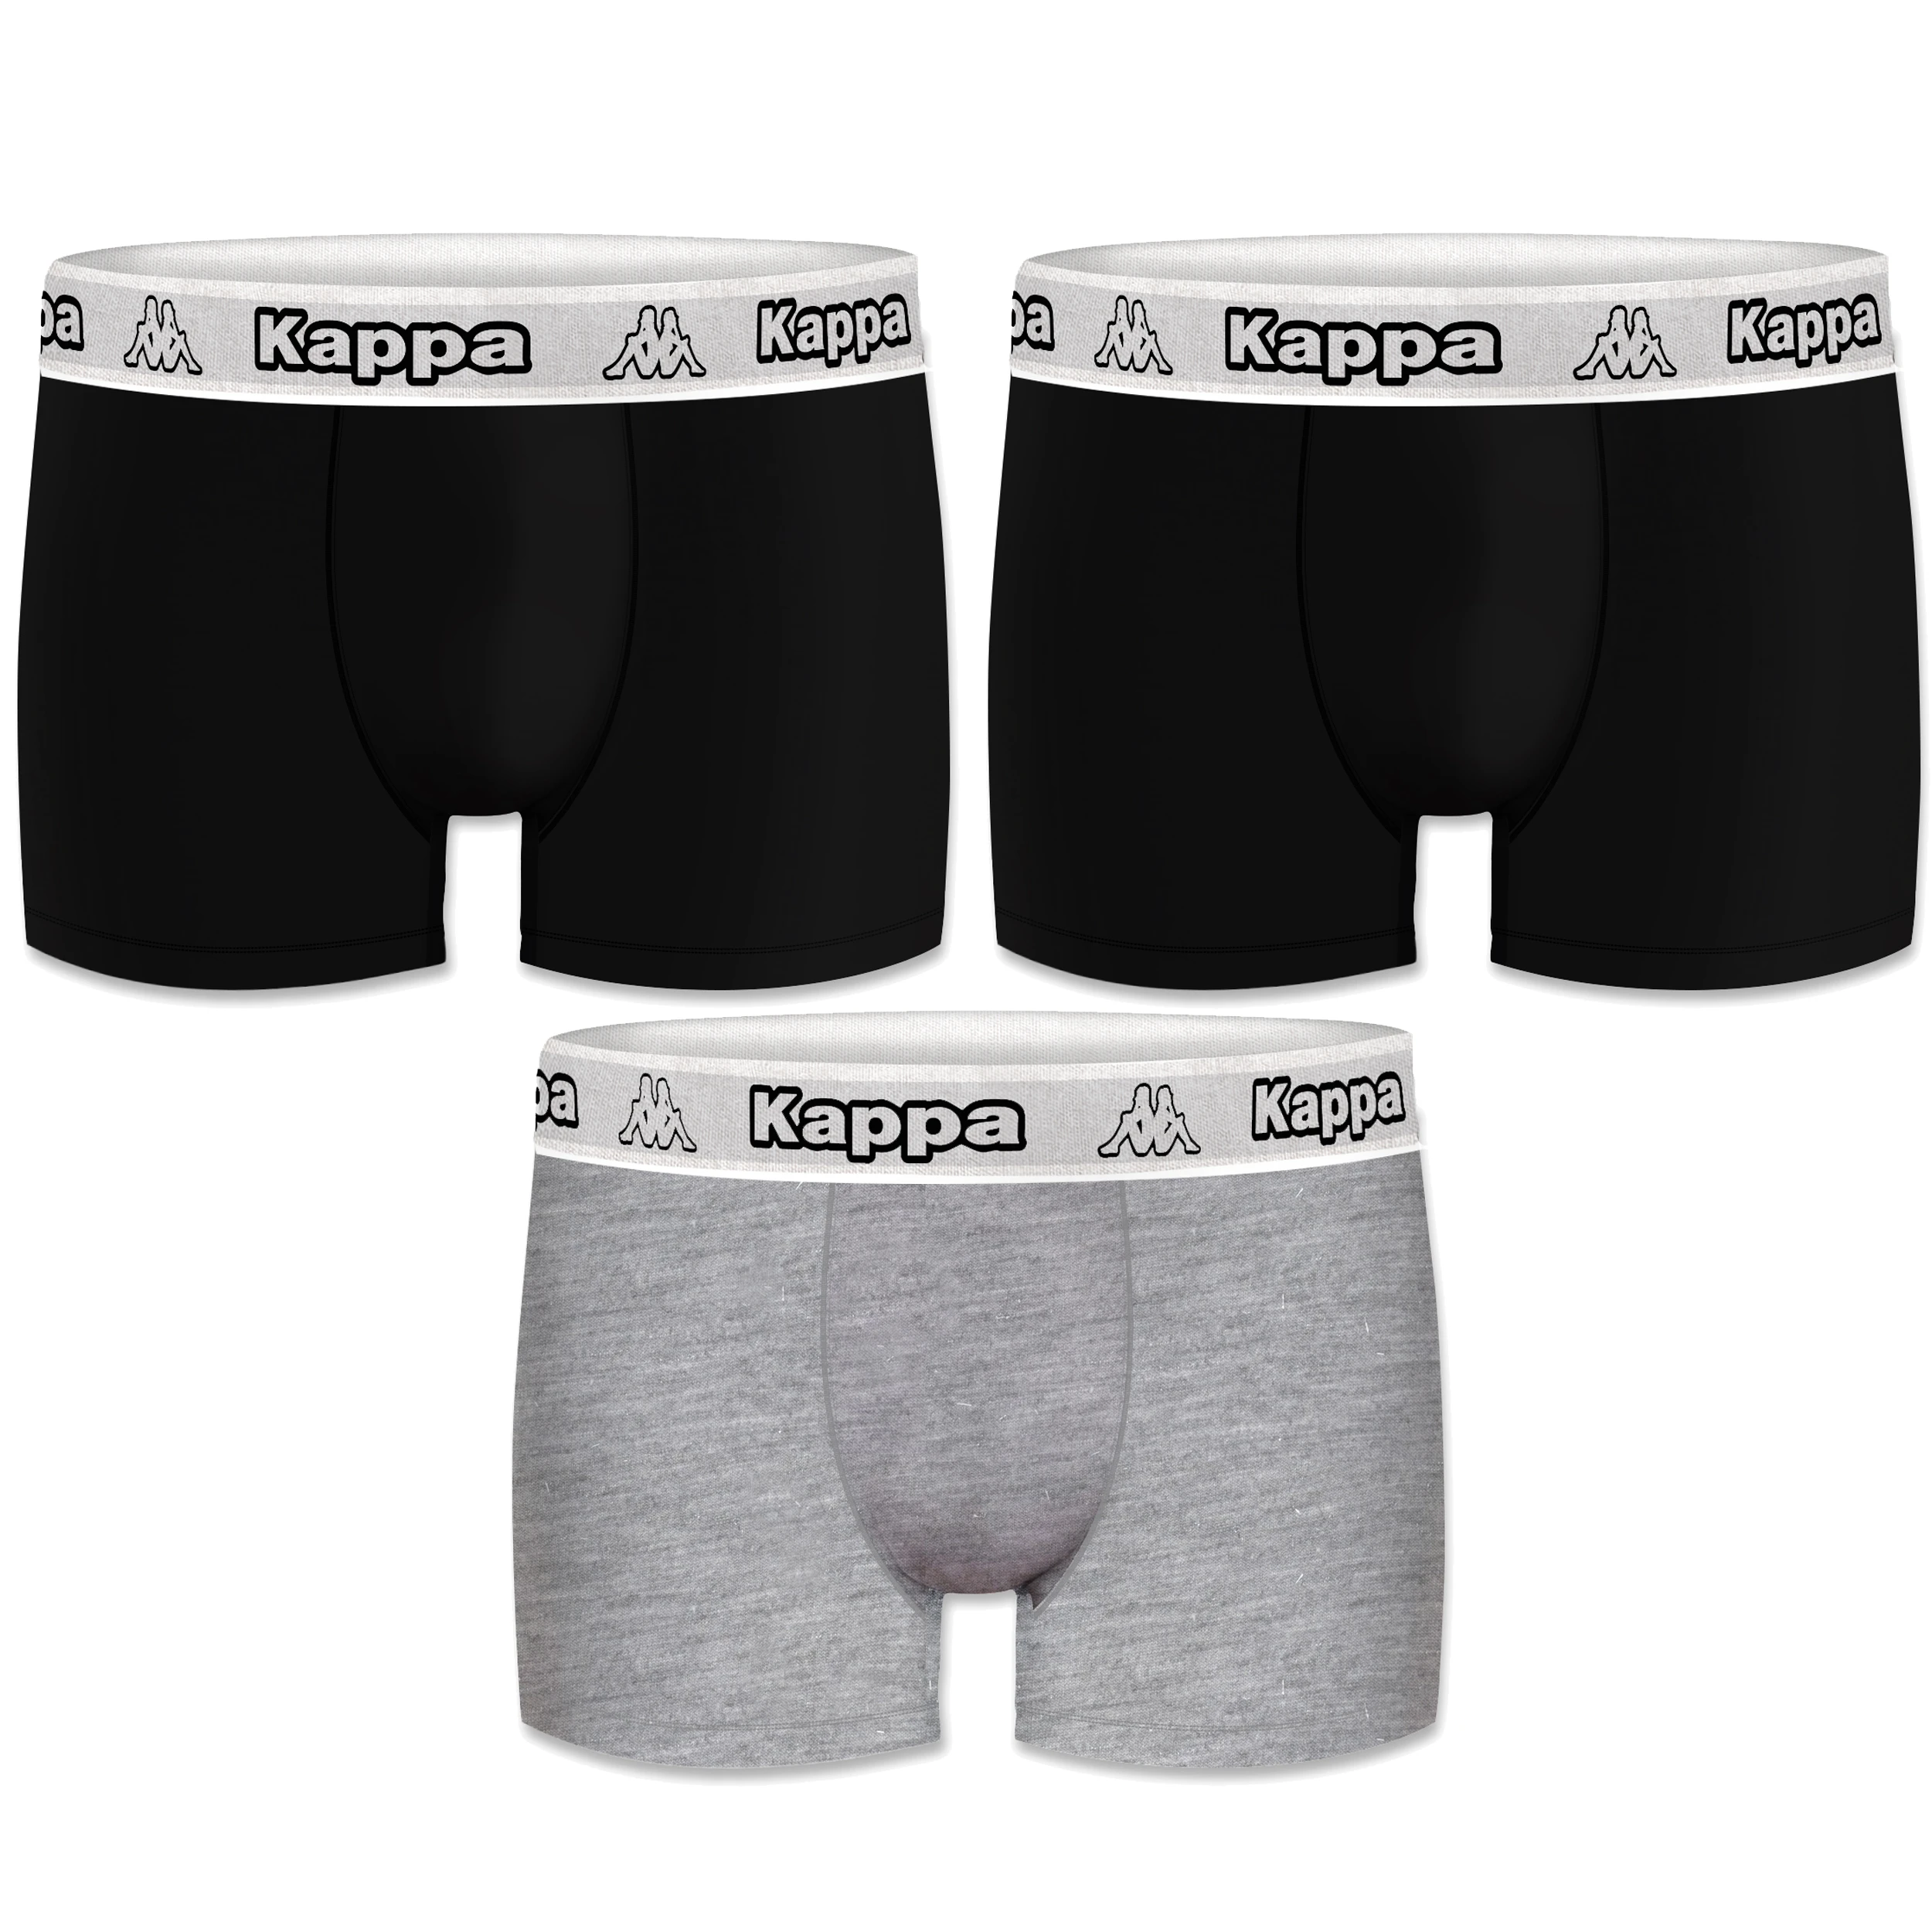 Kappa Boxer Shorts Pack Of 3 Units In Black And Gray Color For Men - Boxers  - AliExpress